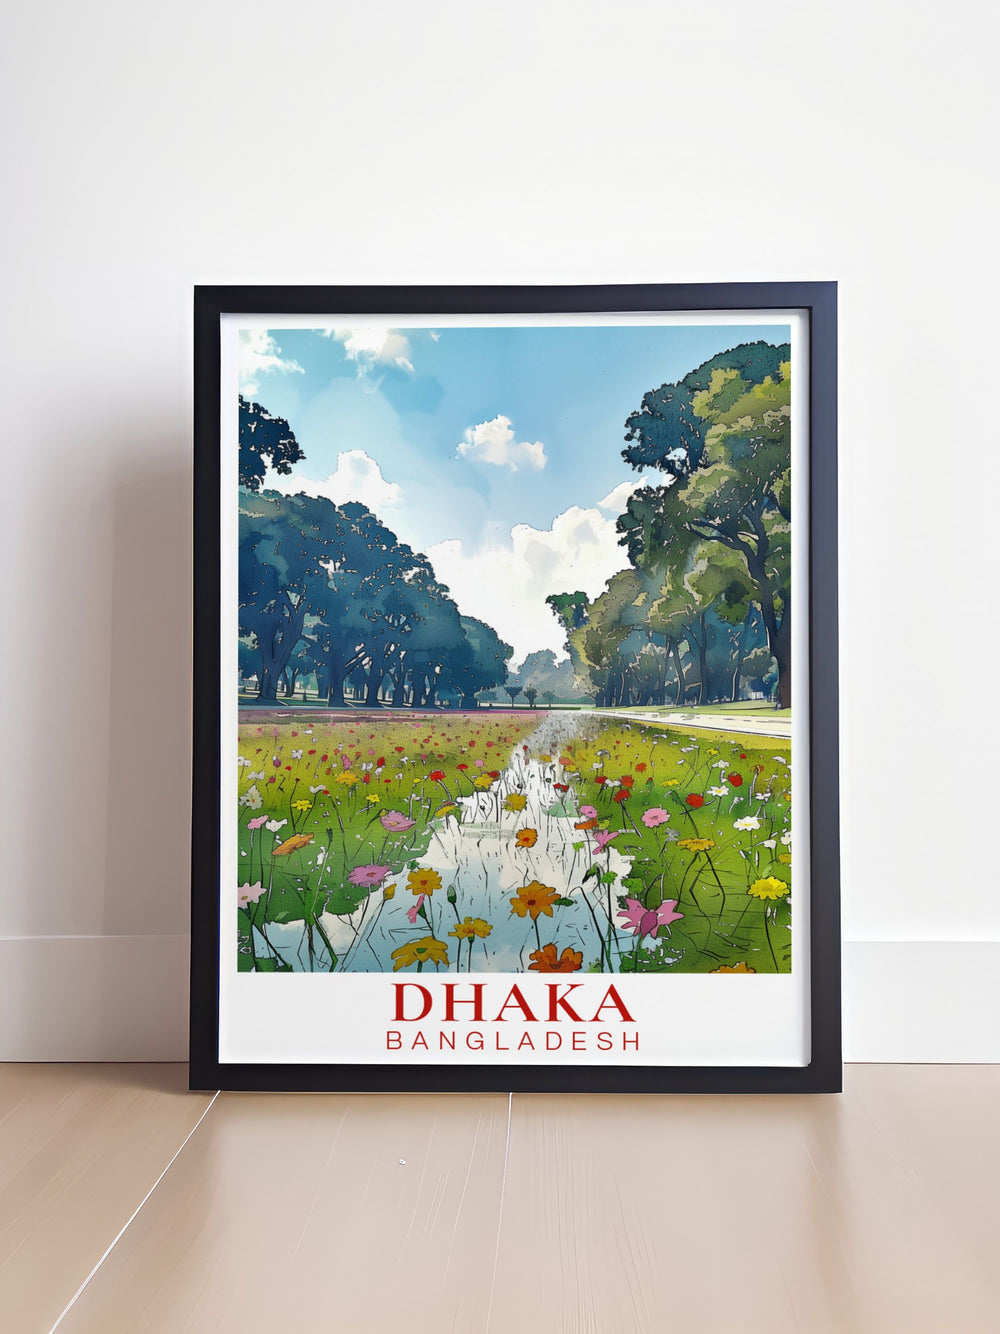 Stunning Ramna Park Art Print showcasing the parks natural beauty and serene atmosphere. Ideal for enhancing your home decor or as a special gift this Ramna Park artwork adds elegance and tranquility to any room celebrating one of Dhakas beloved spots.